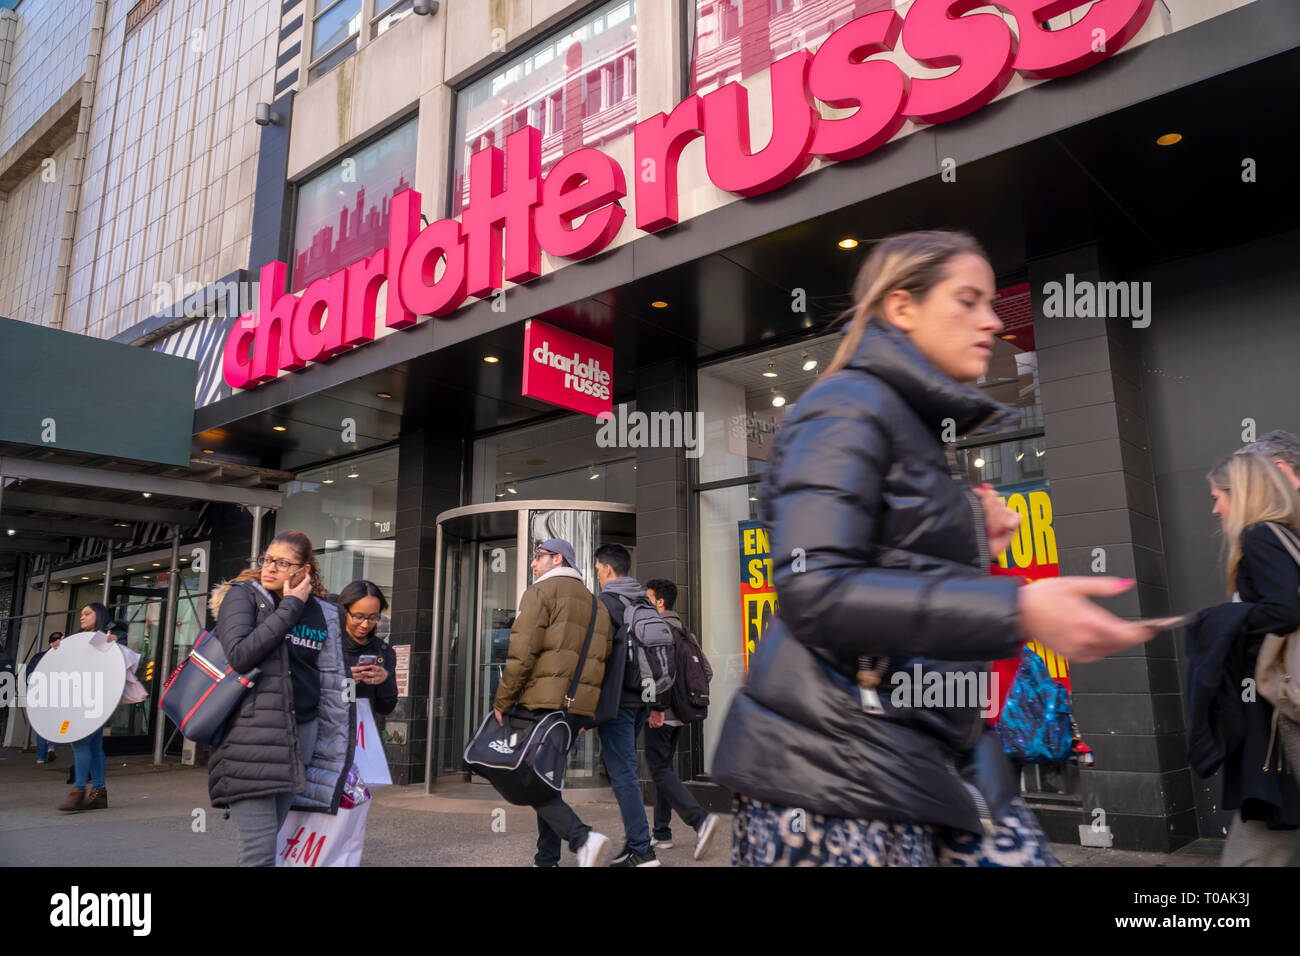 The Charlotte Russe store in Herald Square in New York on Monday, March 11, 2019 displays signs informing shoppers of its final days. The chain is liquidating and closing all of its stores. (© Richard B. Levine) Stock Photo